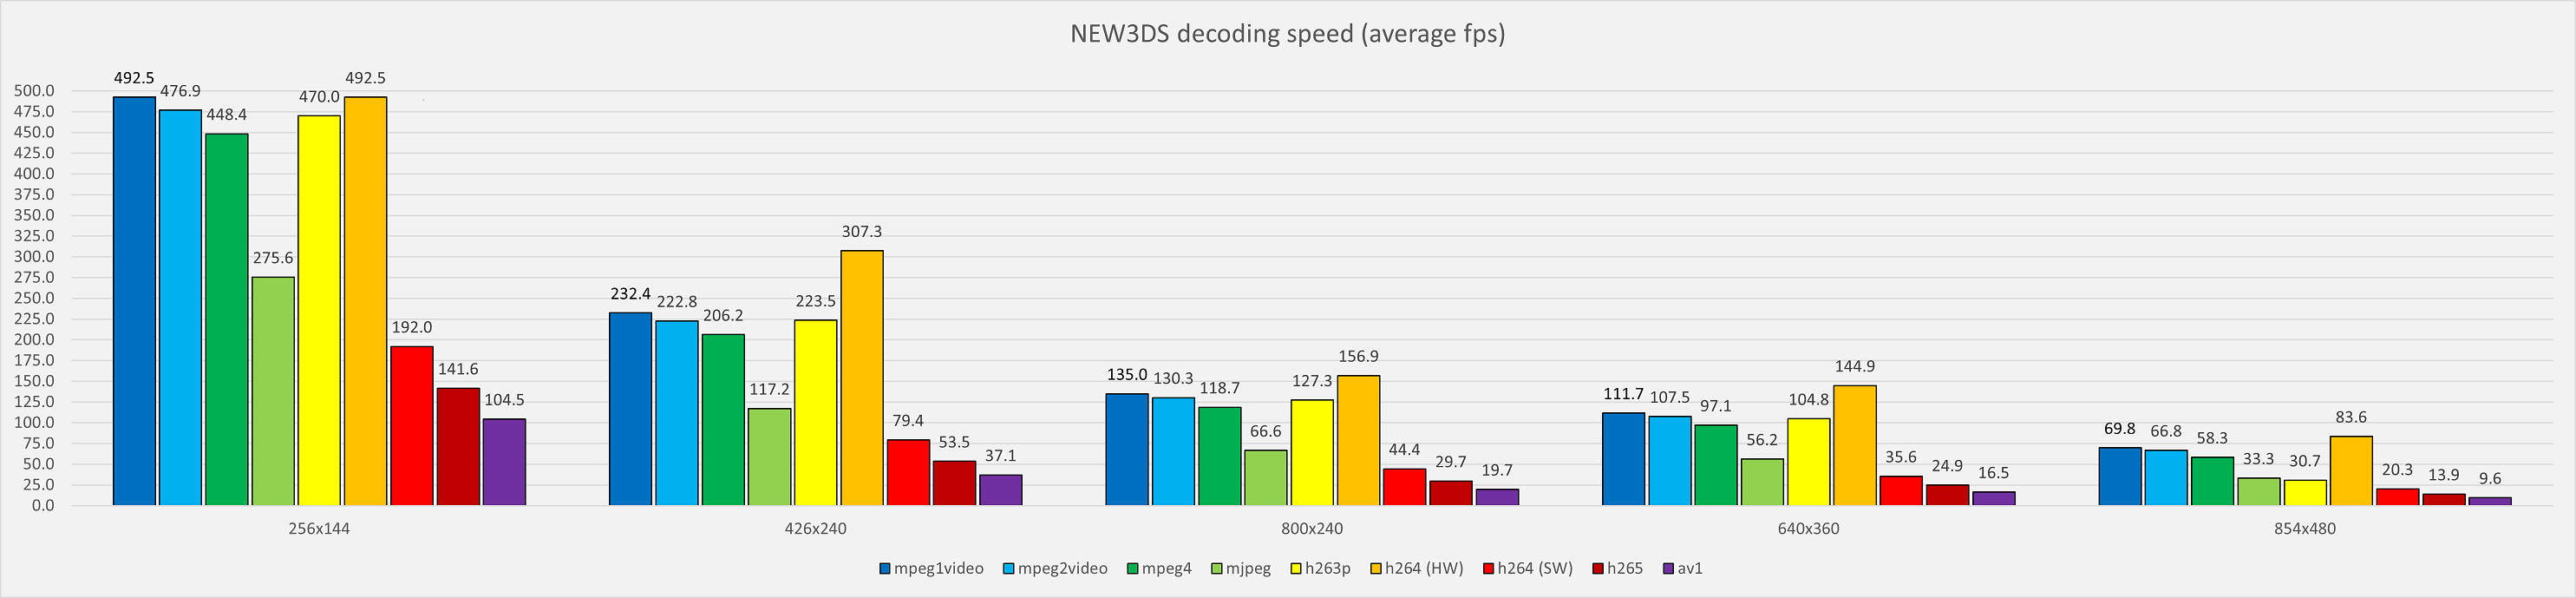 v1_5_3_new_decoding_speed.png